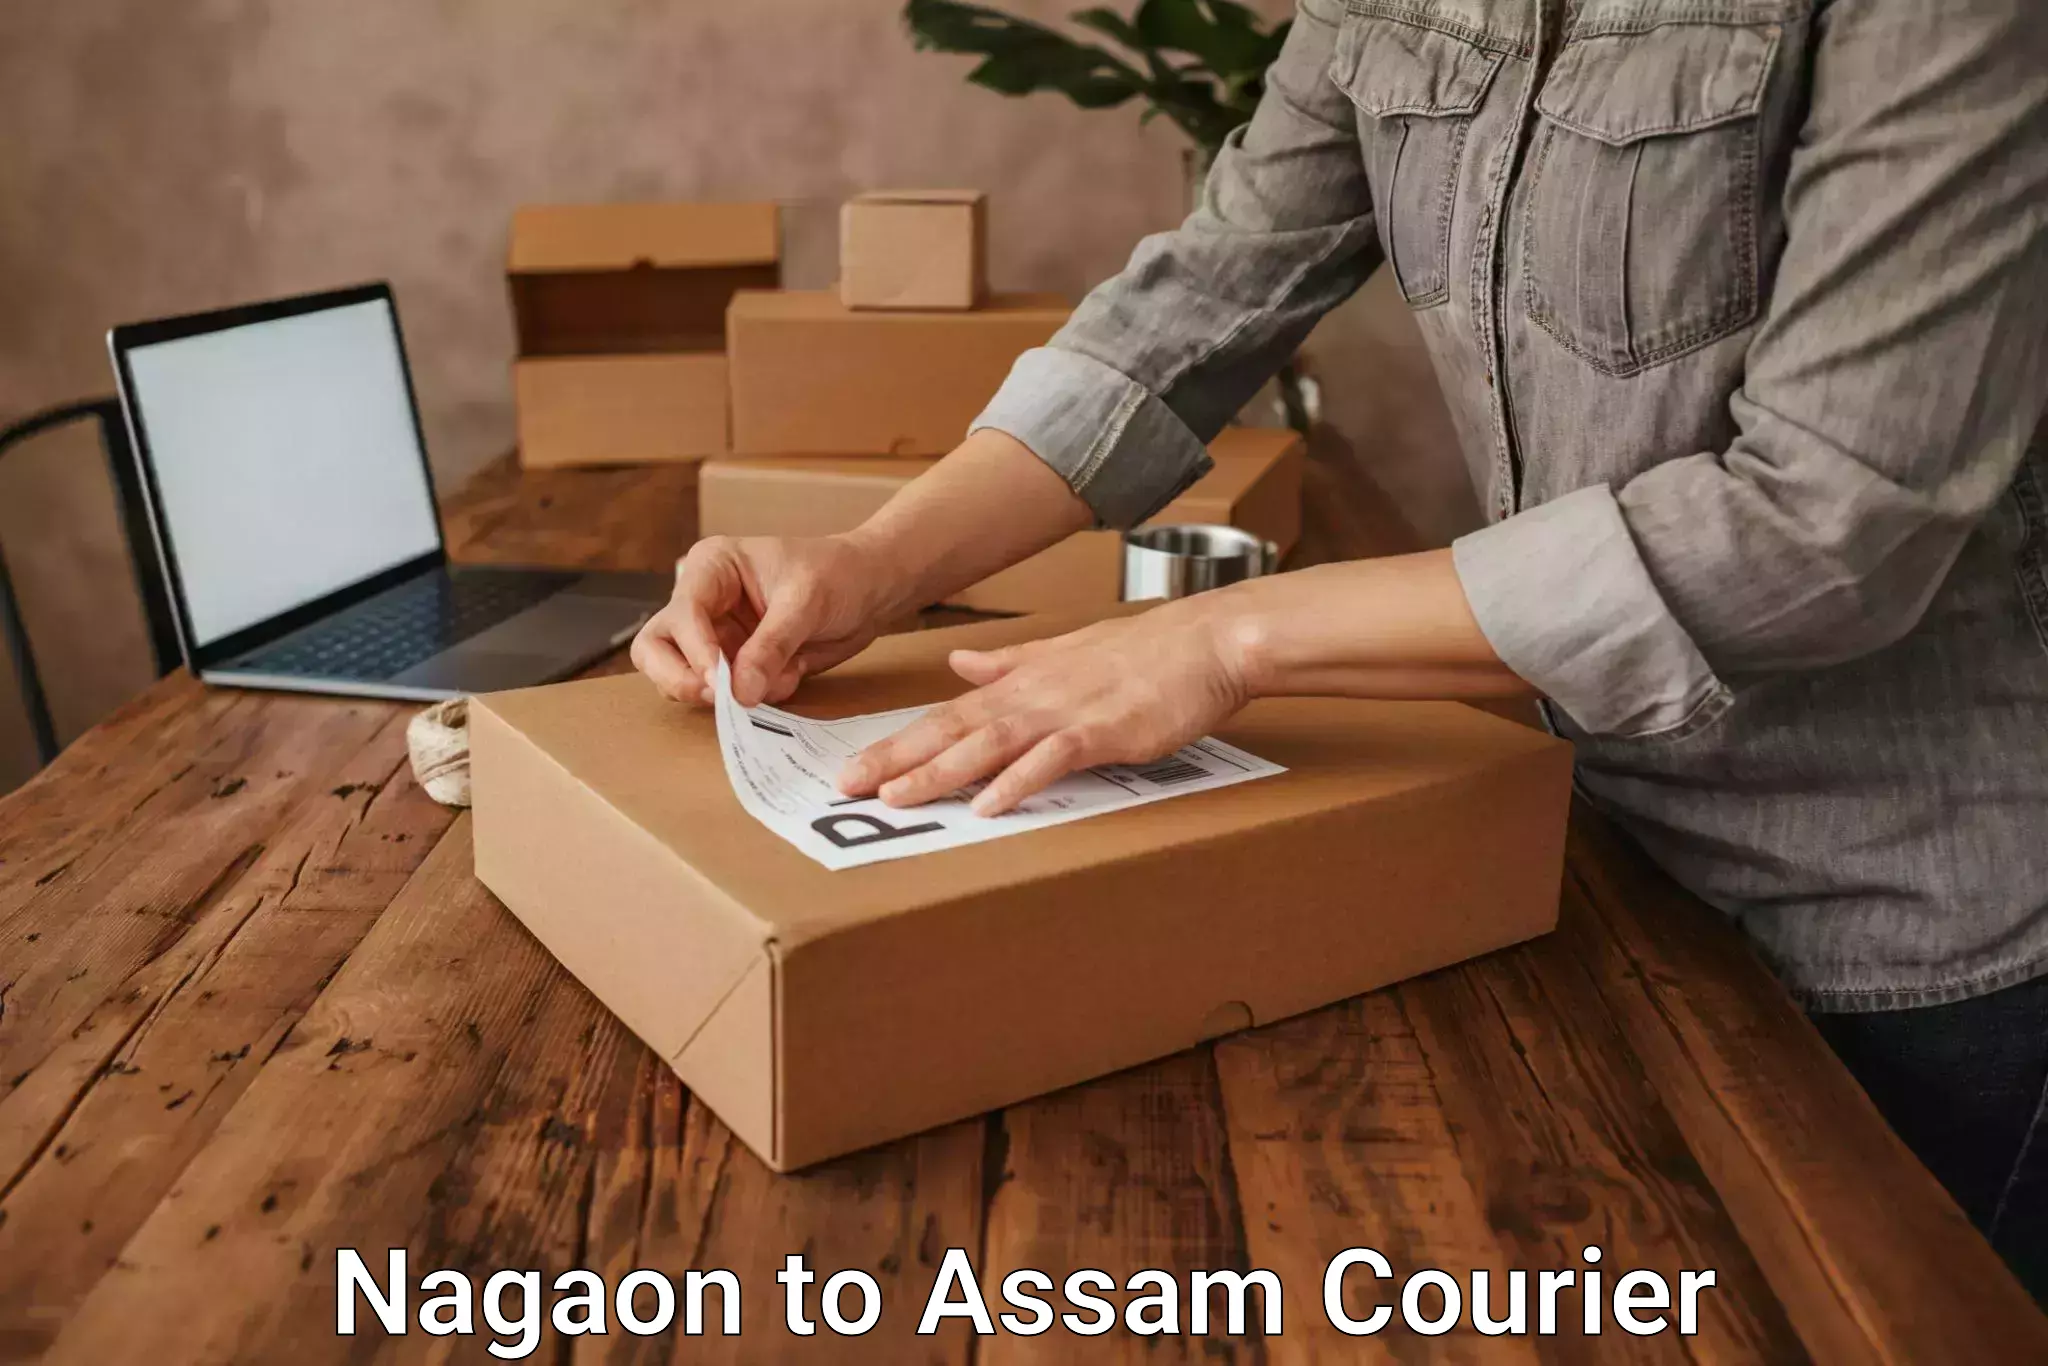 Easy access courier services Nagaon to Jorhat